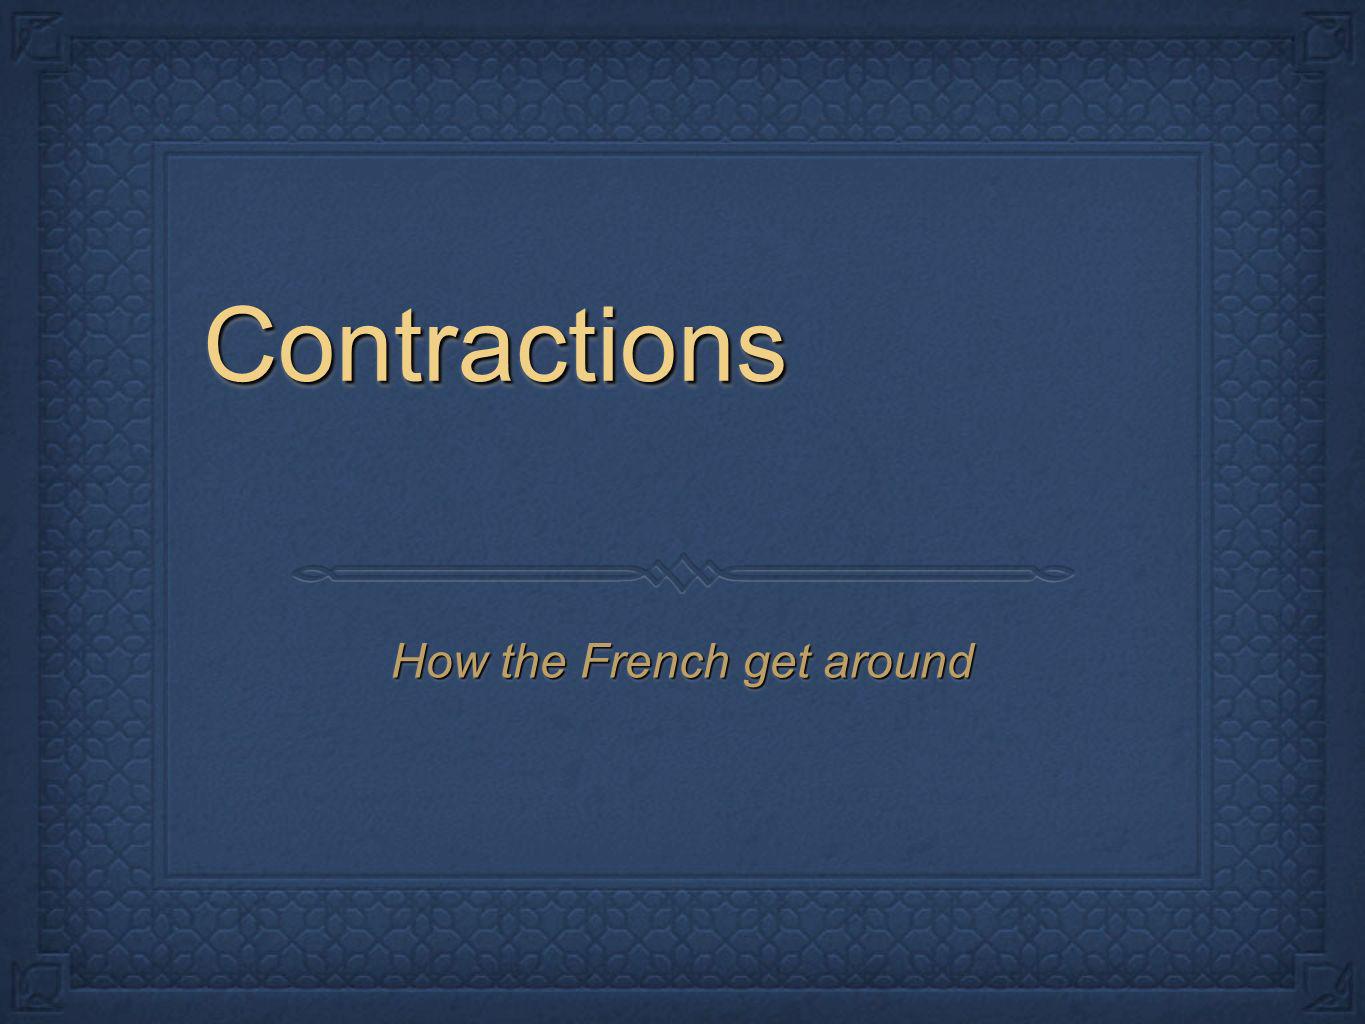 ContractionsContractions How the French get around